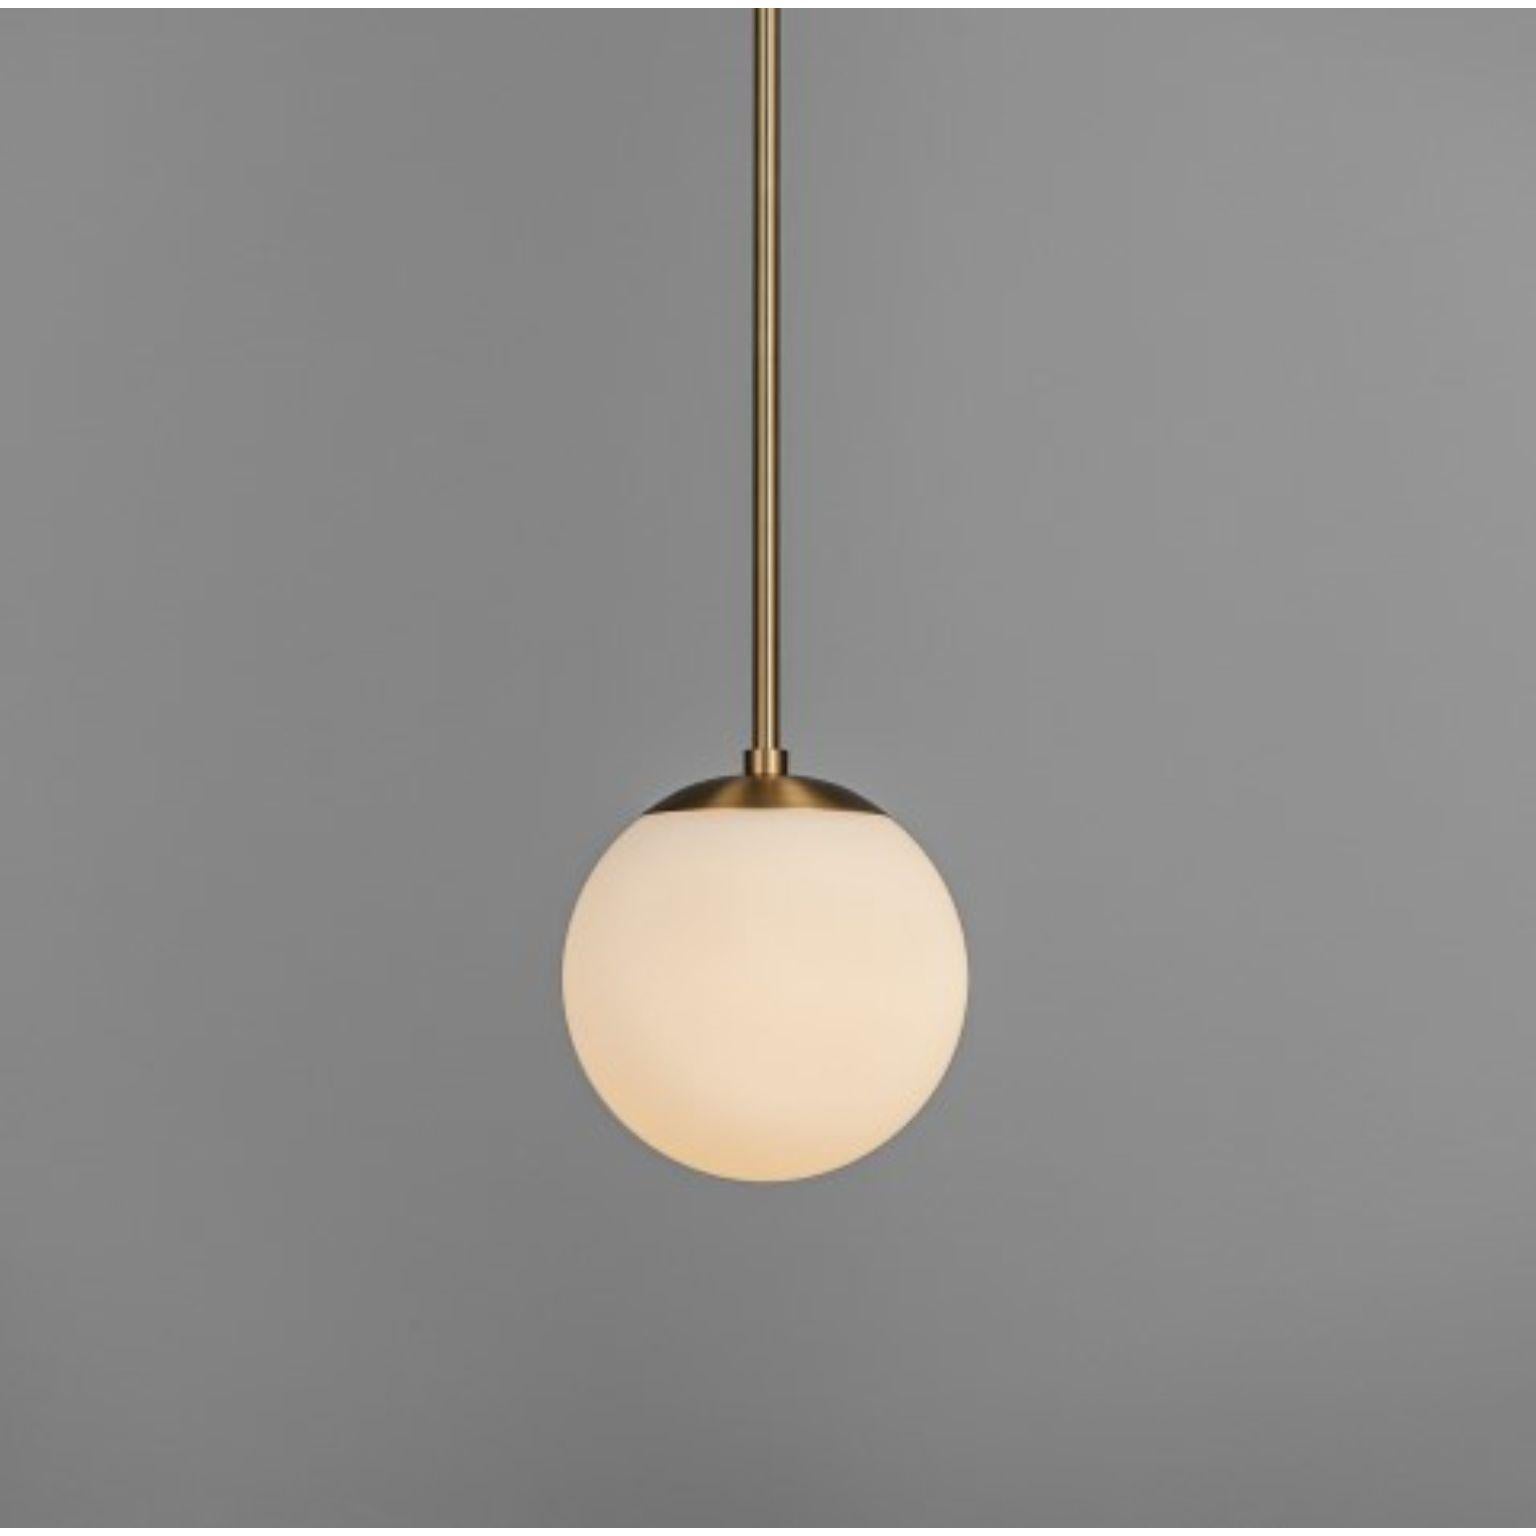 Globe single pendant by Schwung
Dimensions: D 20 x H 142.7 cm
Materials: Brass, Opal glass
Weight: 2.6 kg

Finishes available: Black gunmetal, polished nickel, brass
Other sizes available.

 Schwung is a german word, and loosely defined,